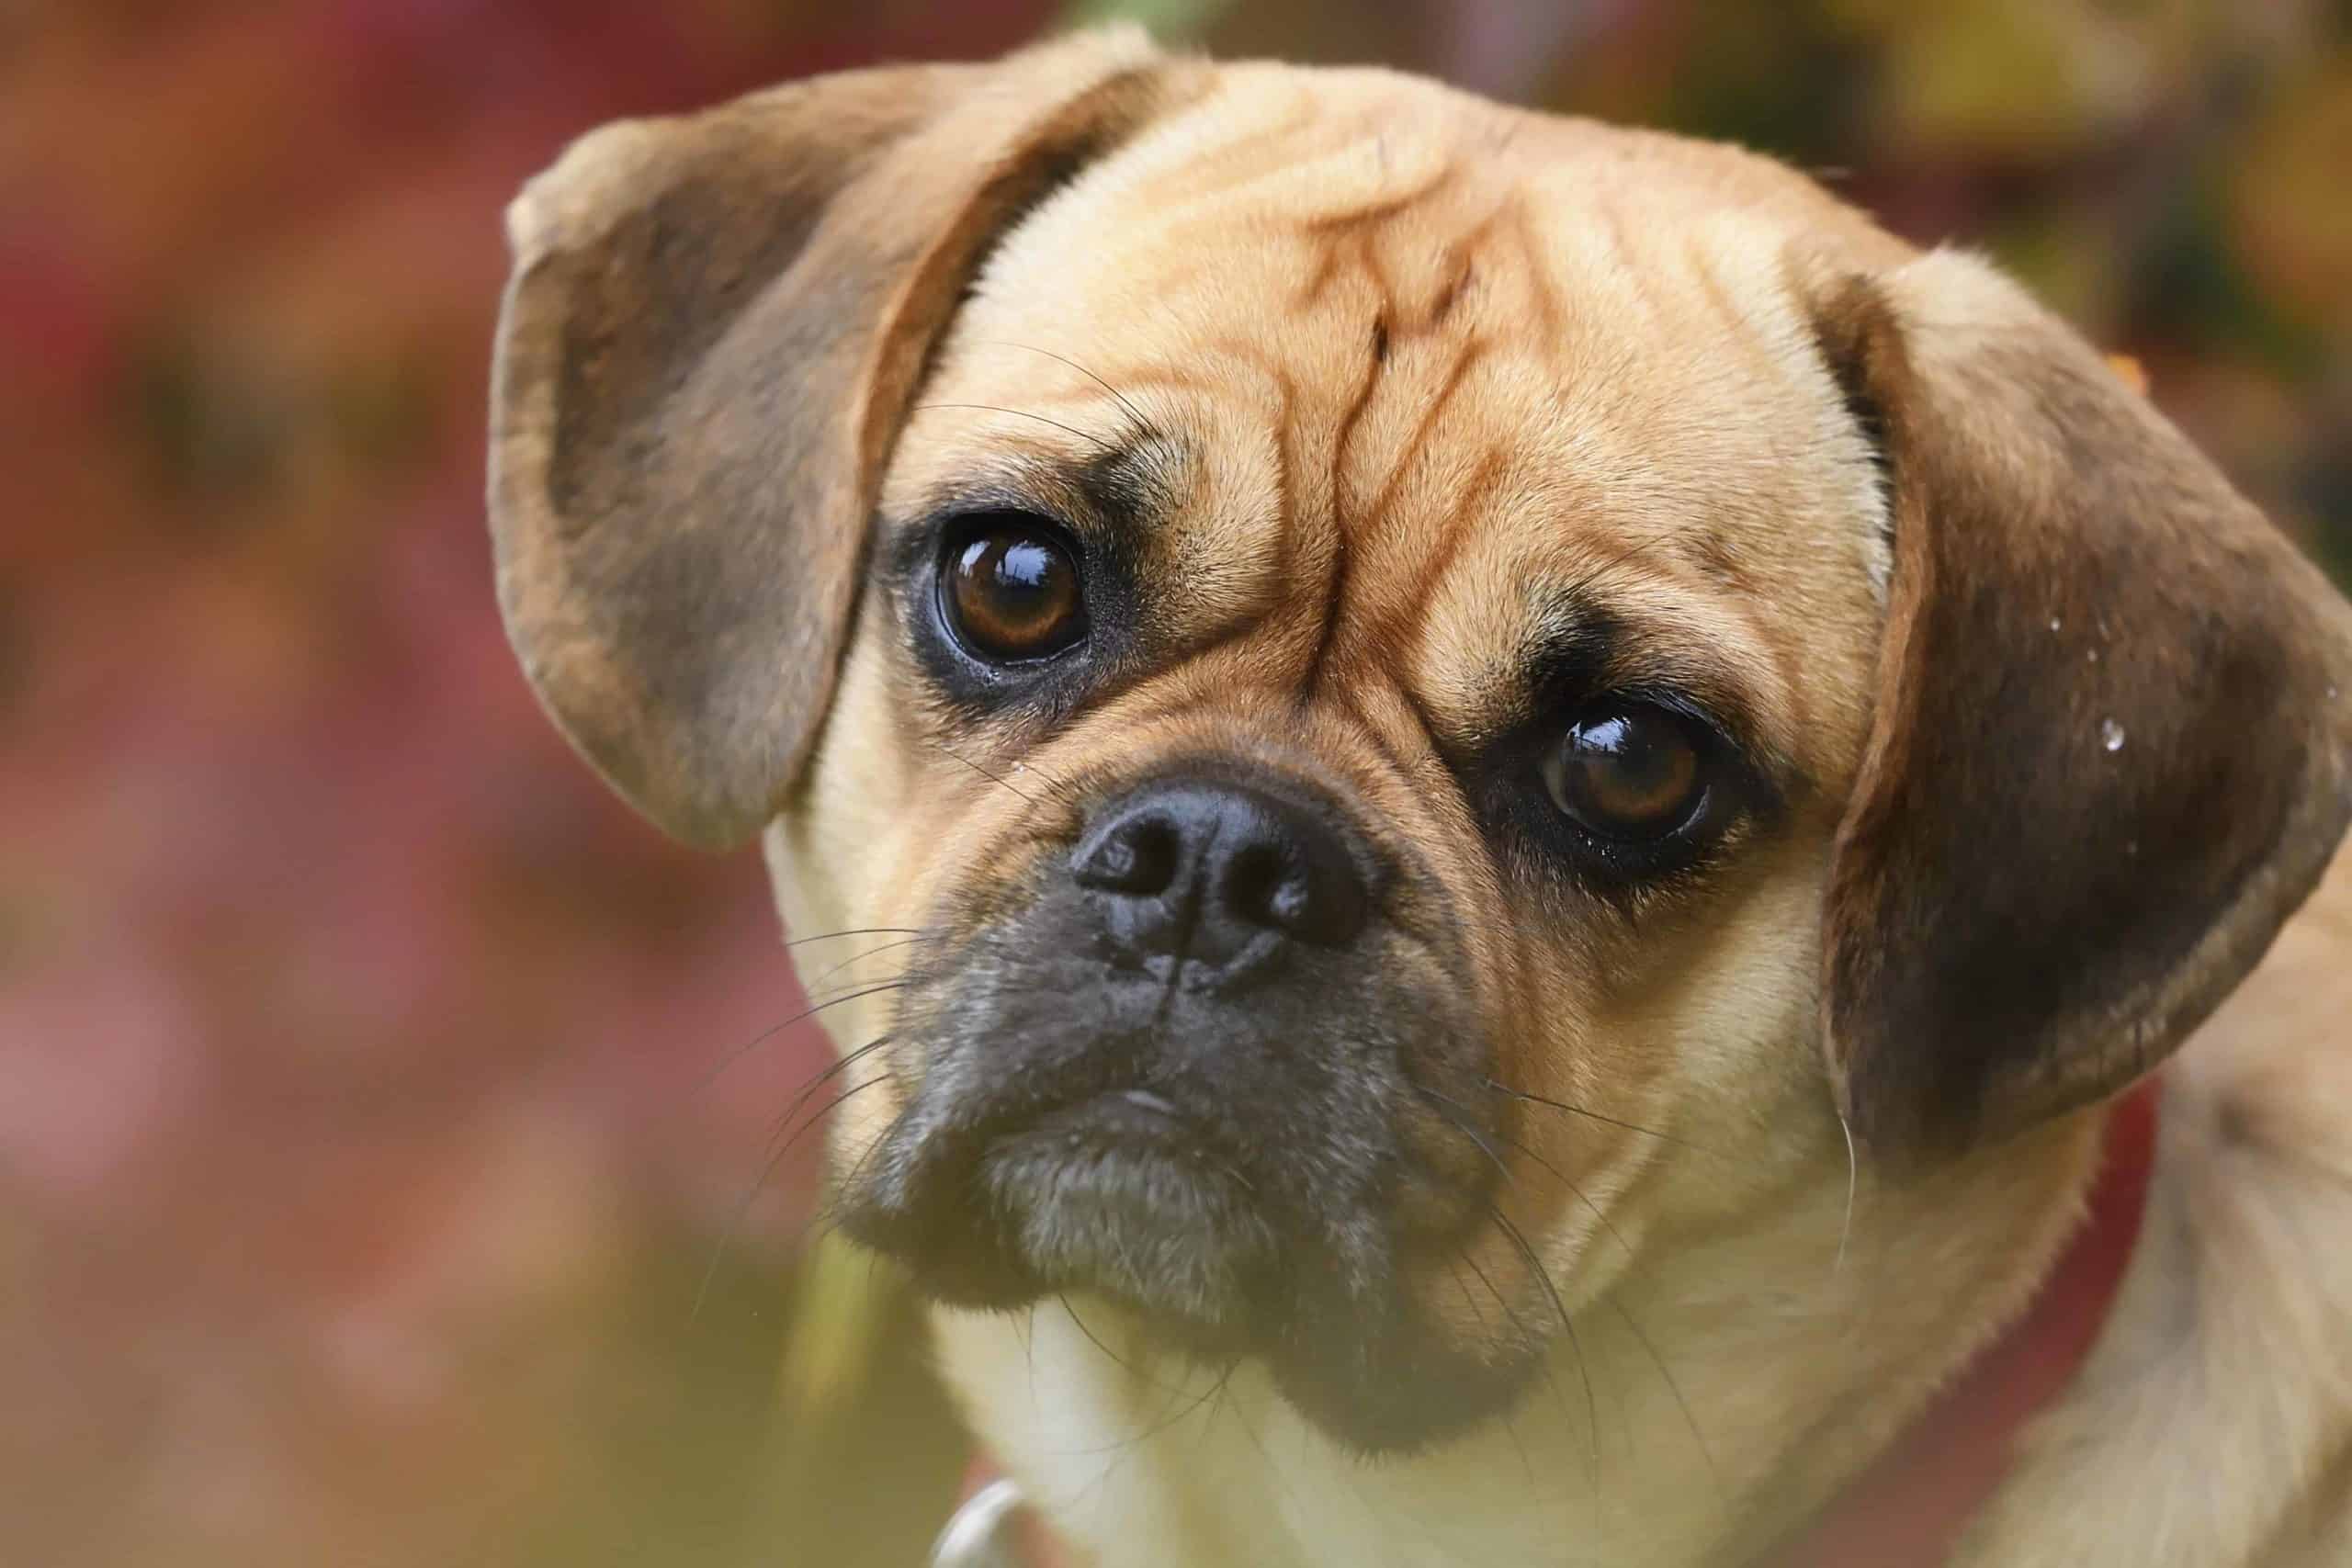 The puggle is a mix of the pug and the beagle.